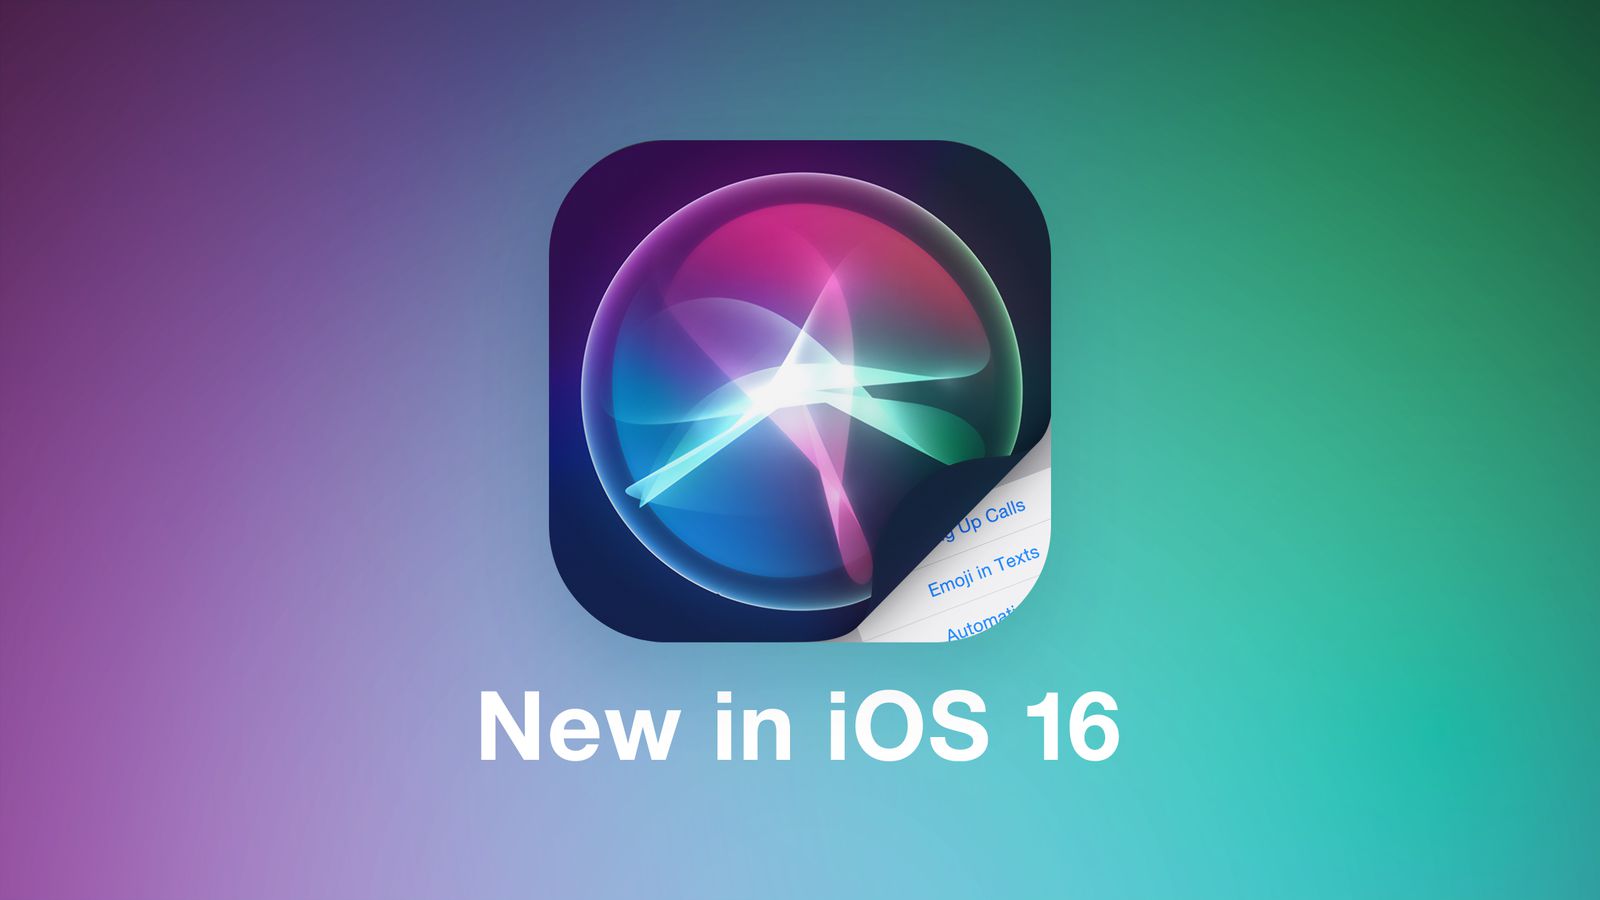 Siri icon with text: New in IOS 16